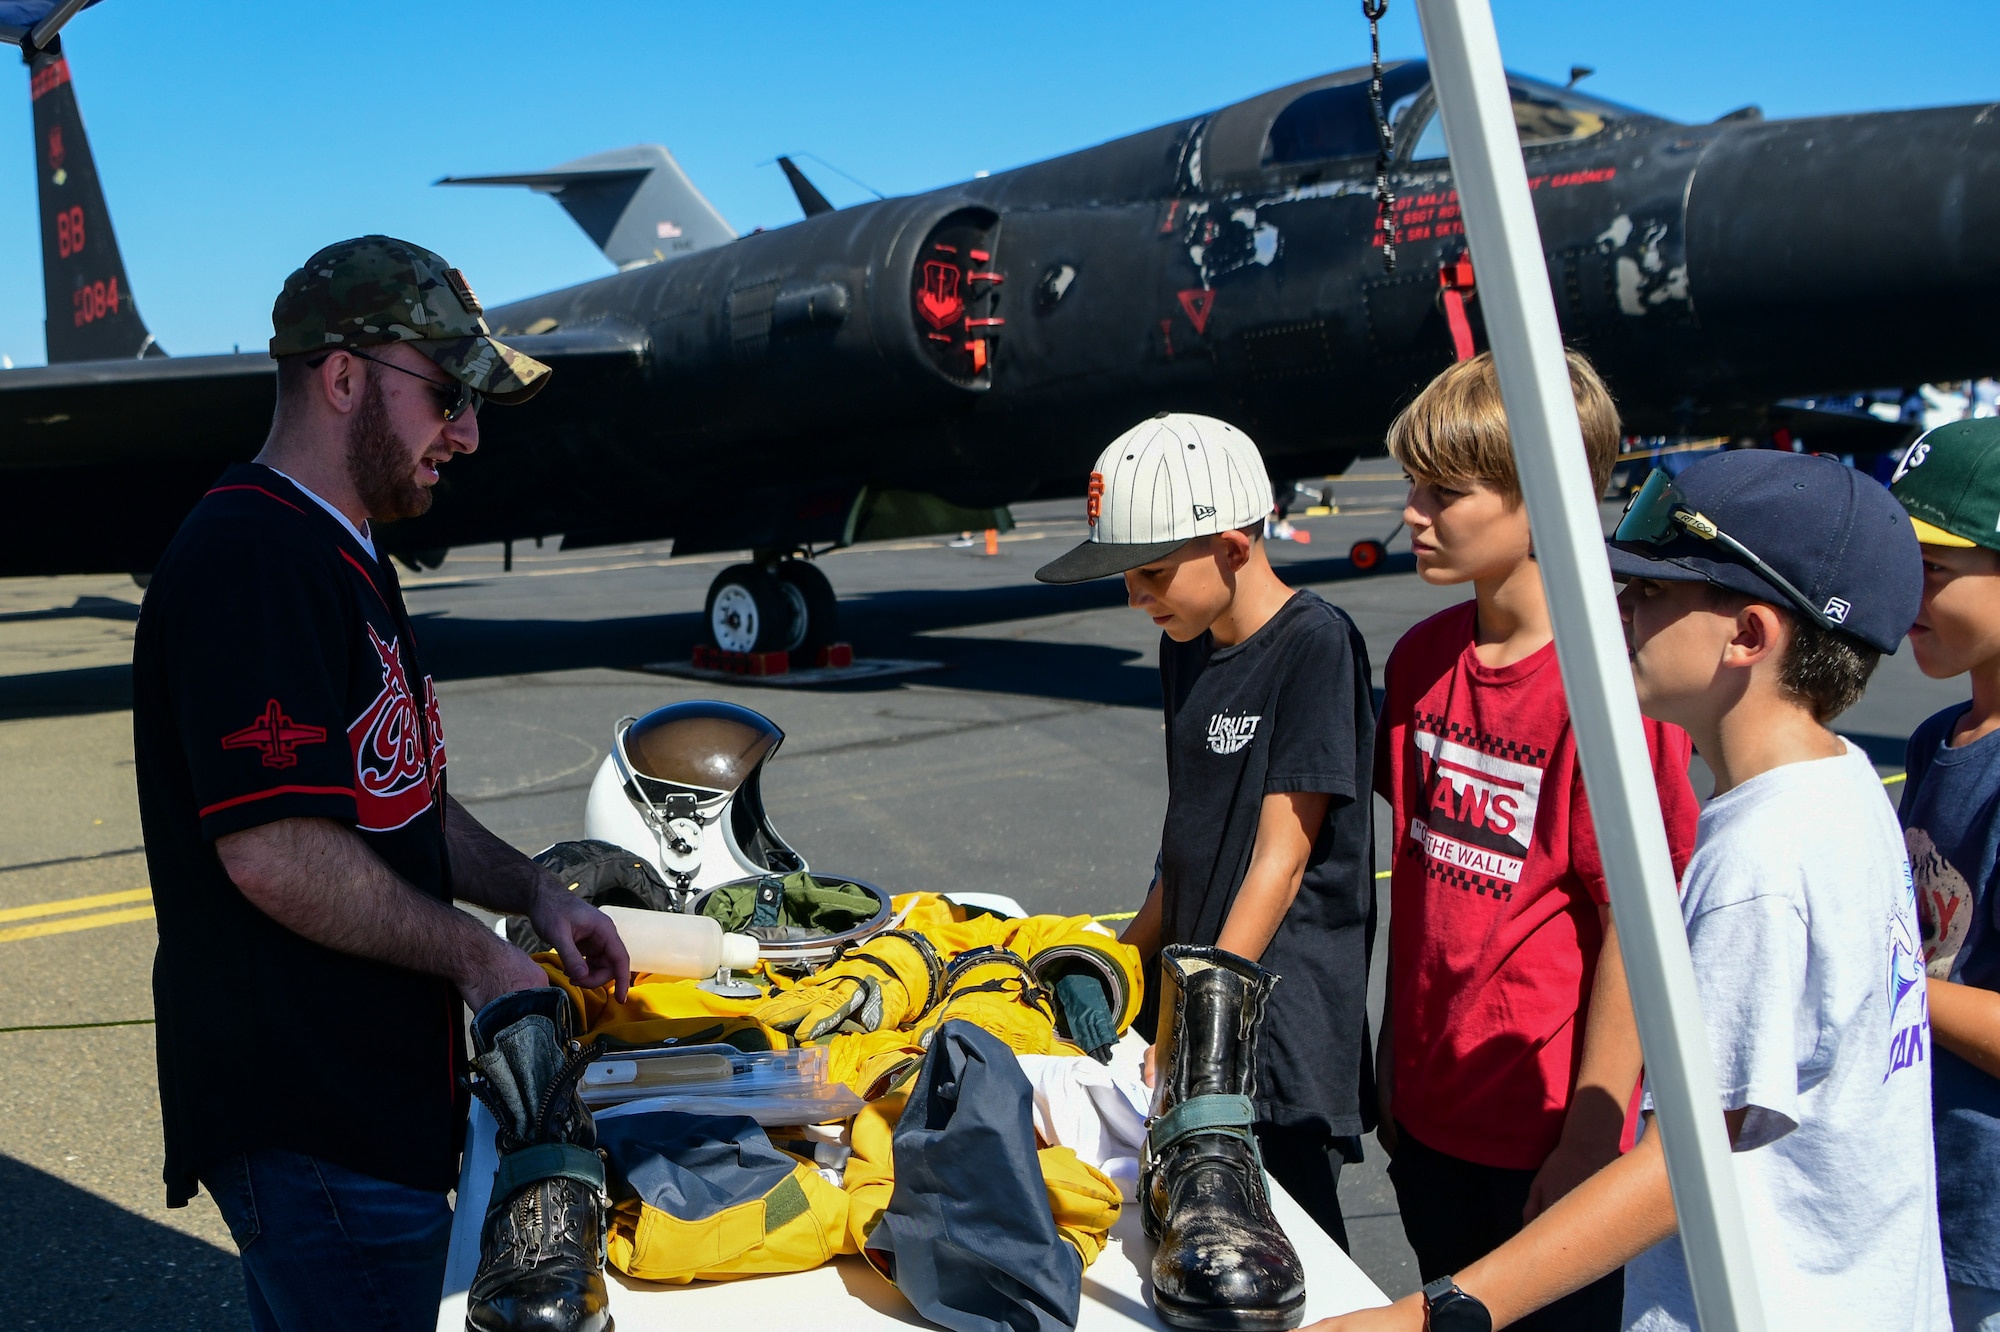 A group of children look at the U-2 flight suit display during the California Capital Airshow at Mather Airport, Calif., on Oct. 2, 2022.